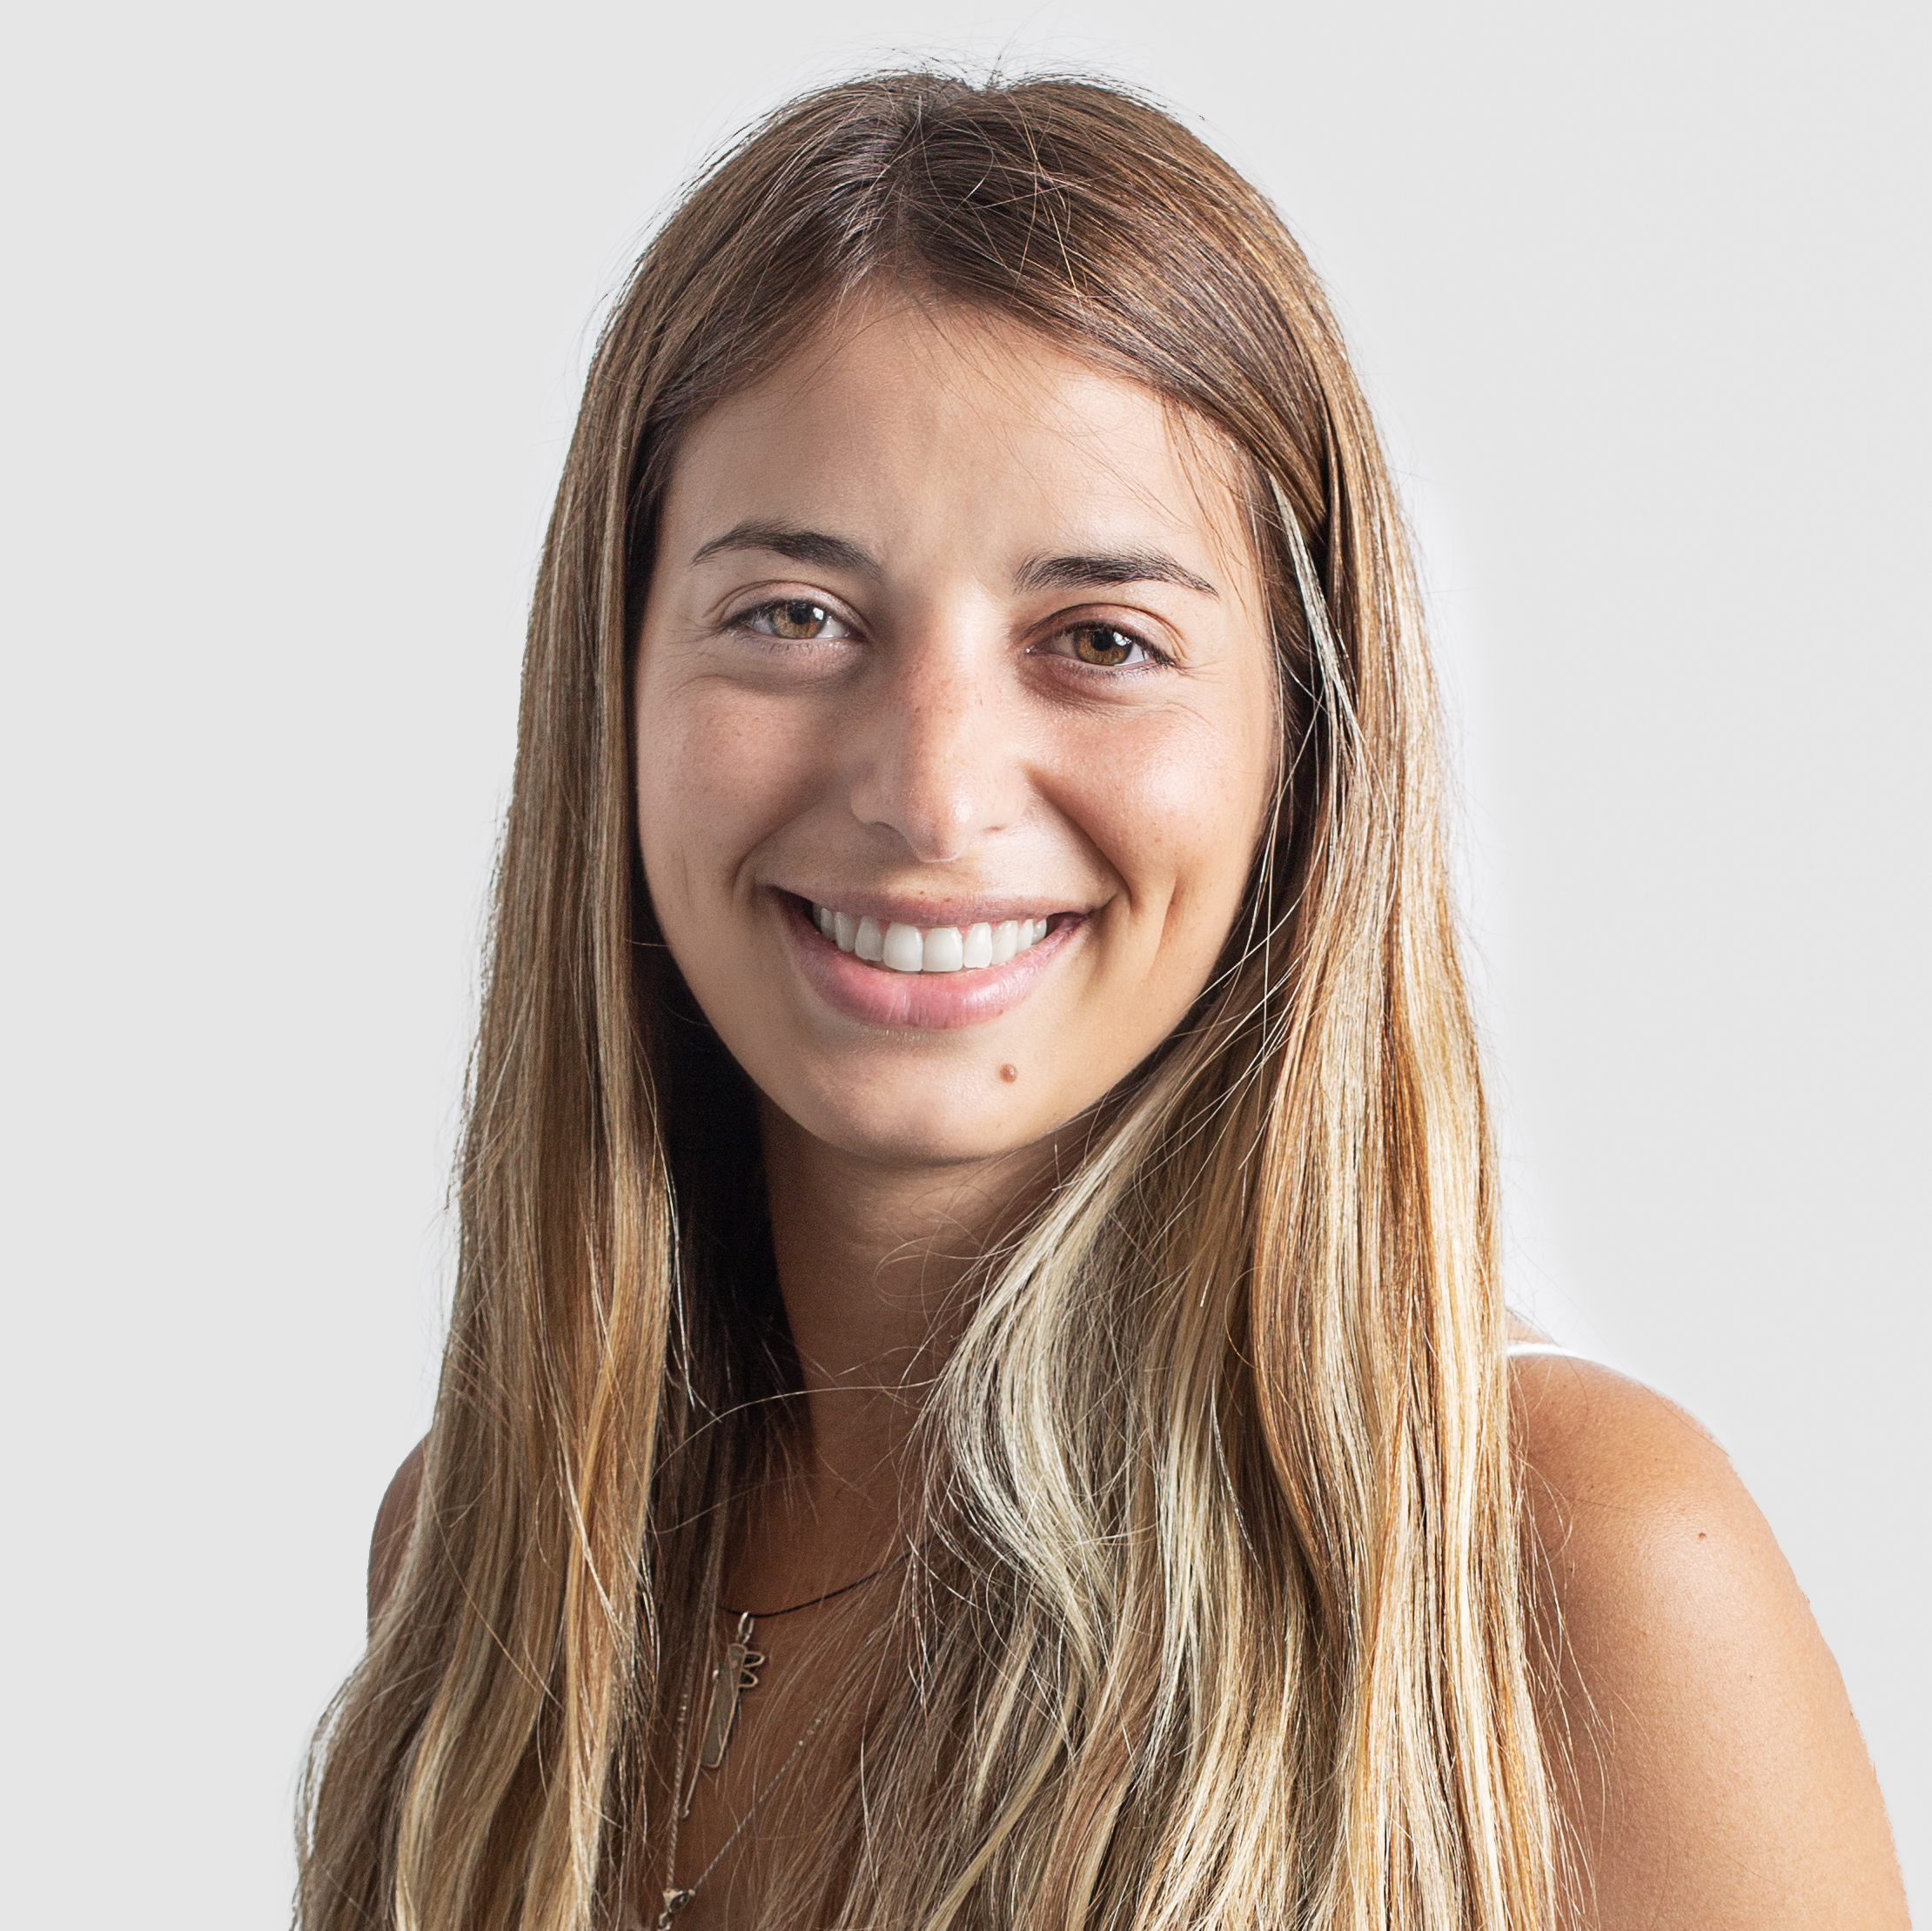 Maela Pascullo – Project Officer, Research